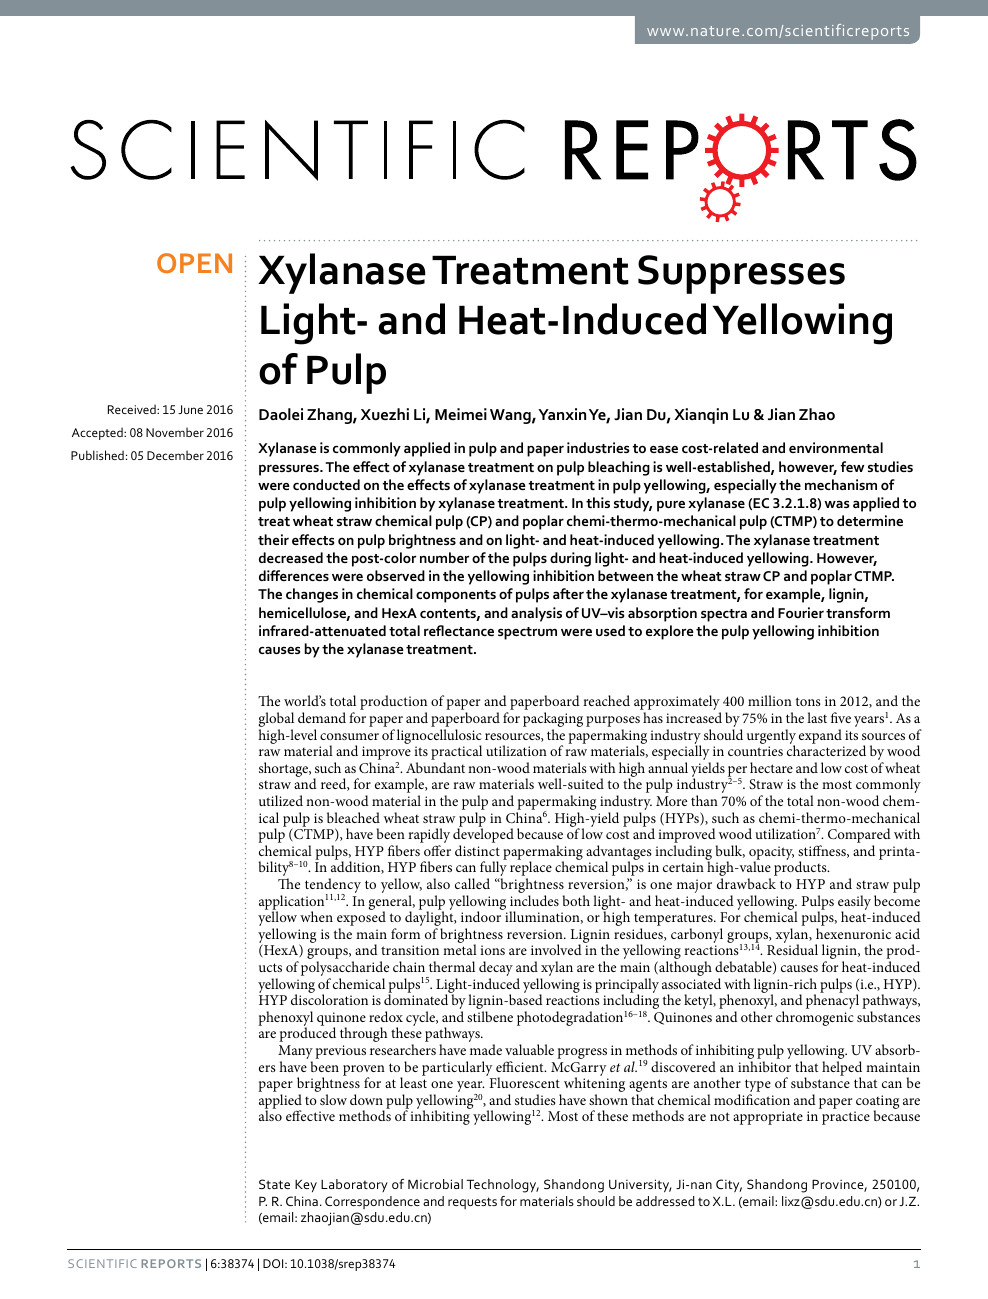 Xylanase Treatment Suppresses Light And Heat Induced Yellowing Of Pulp Topic Of Research Paper In Chemical Sciences Download Scholarly Article Pdf And Read For Free On Cyberleninka Open Science Hub